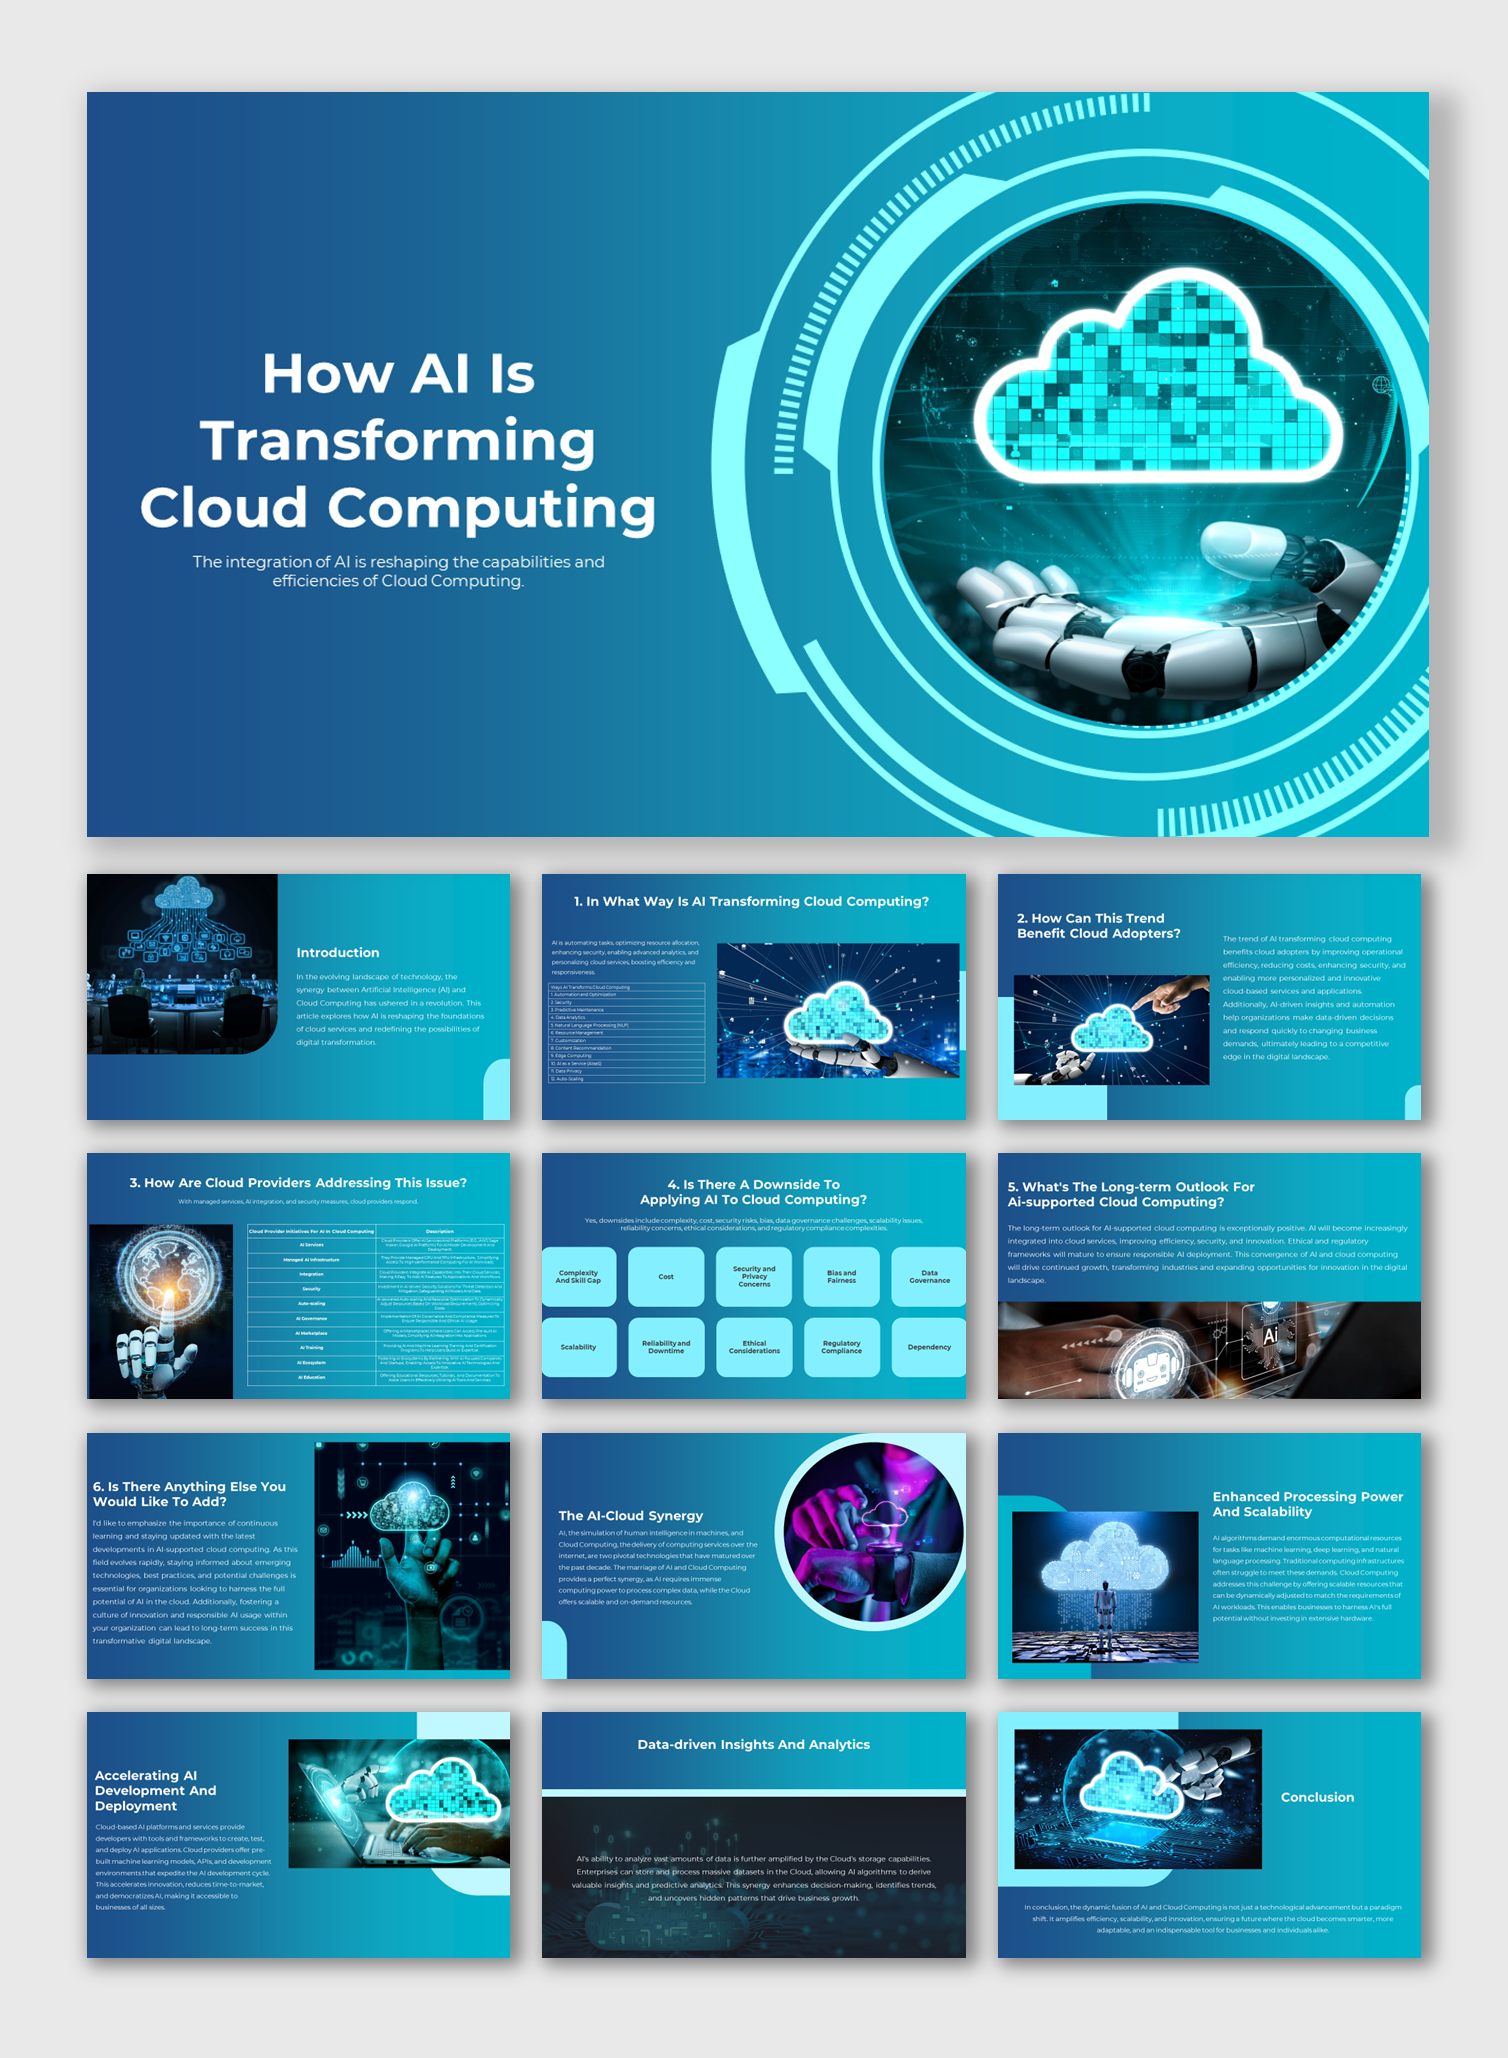 Digital transformation with the power of cloud computing and AI by